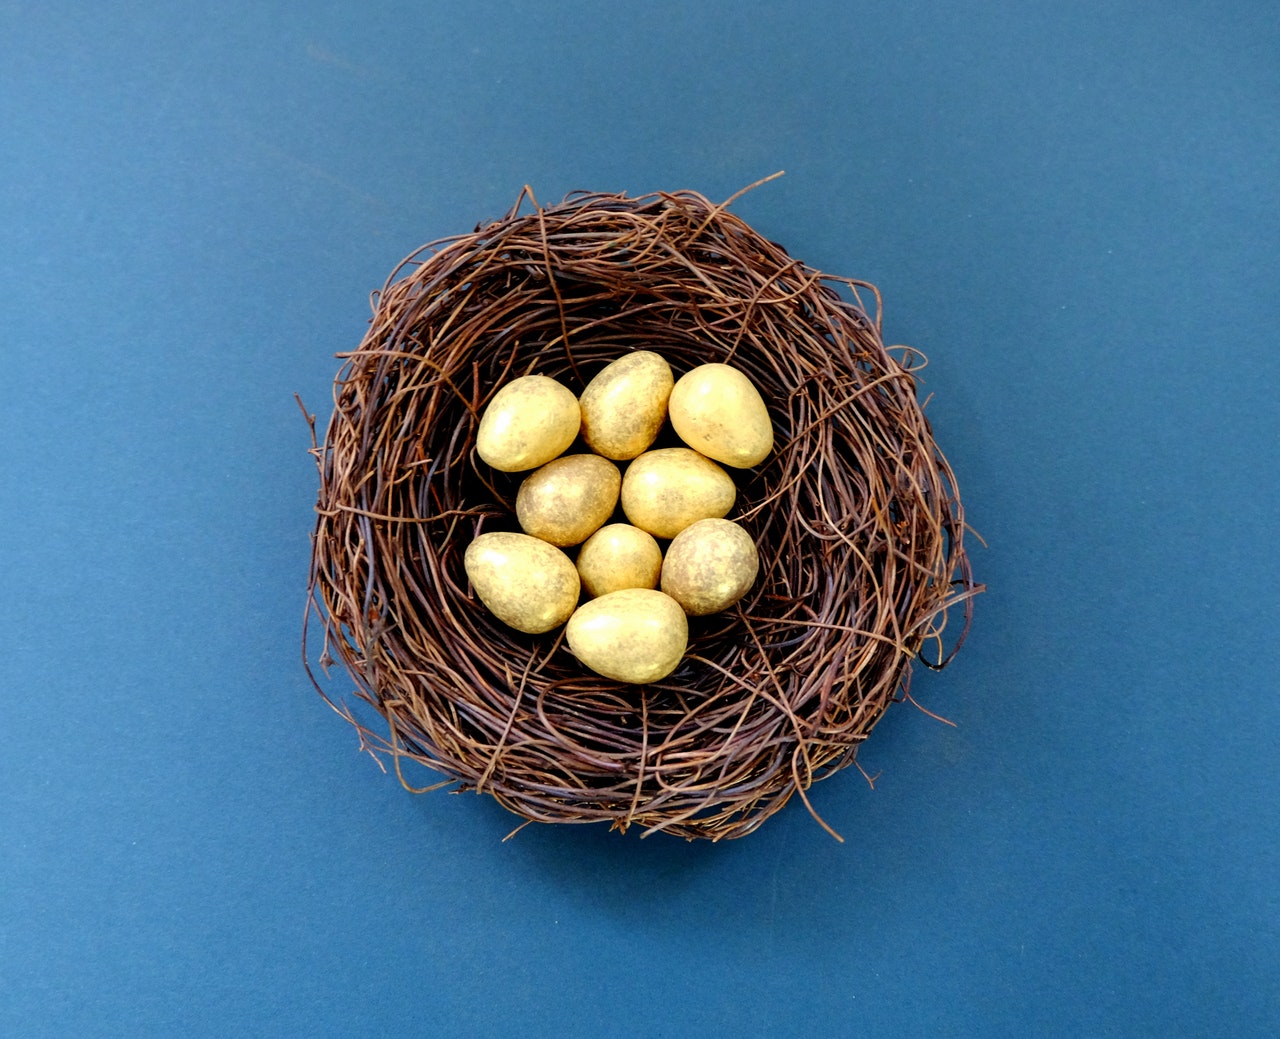 Easiest way to get rich quick is to believe your own nest is filled with gold eggs